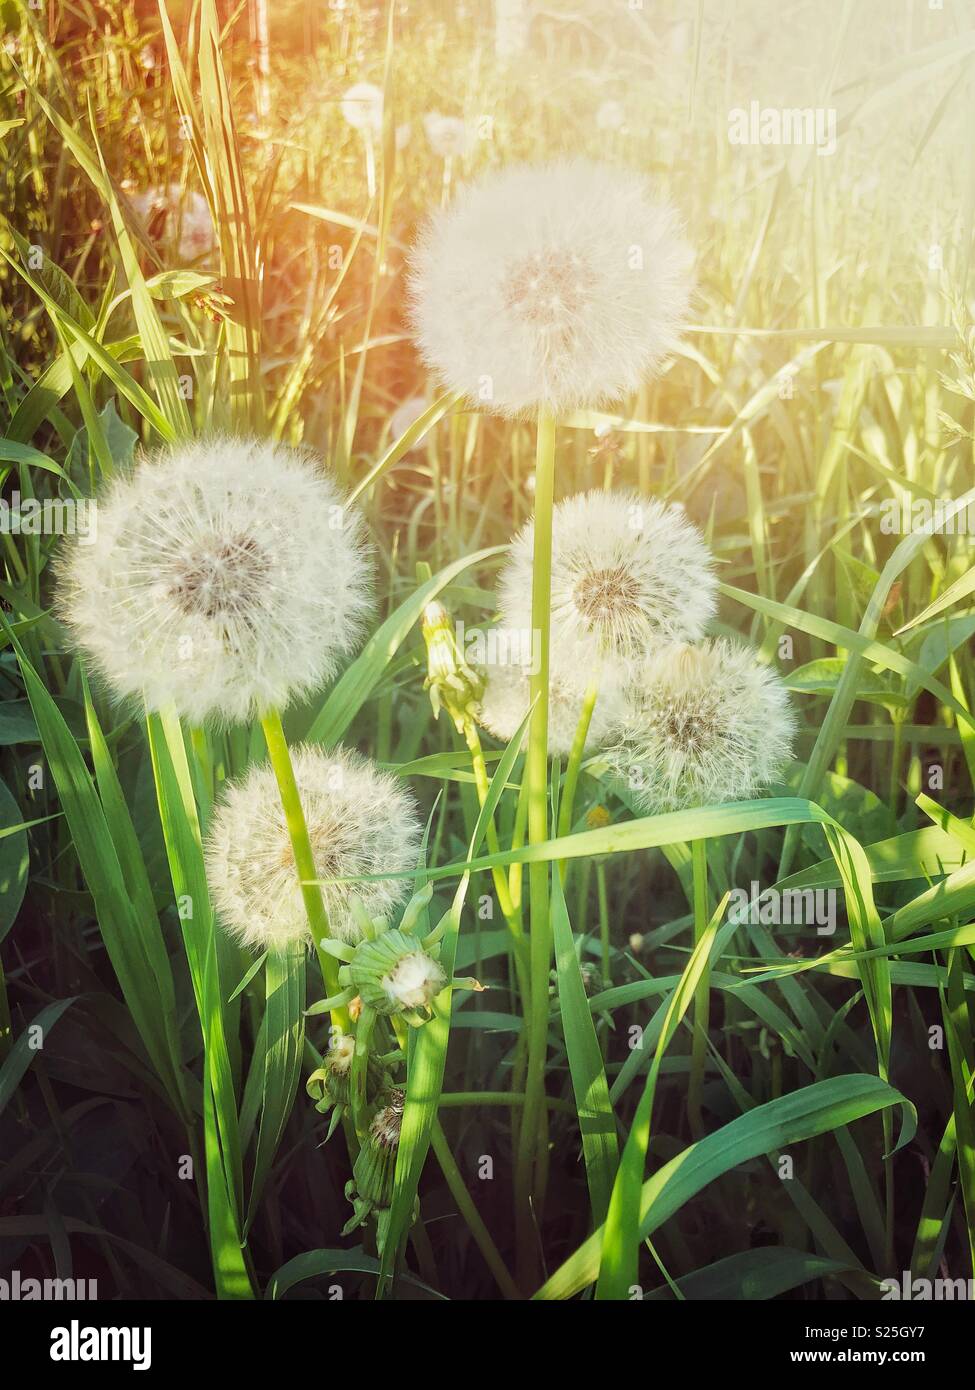 Fluffy dandelions that have gone to seed in long grass with evening sunset lighting Stock Photo